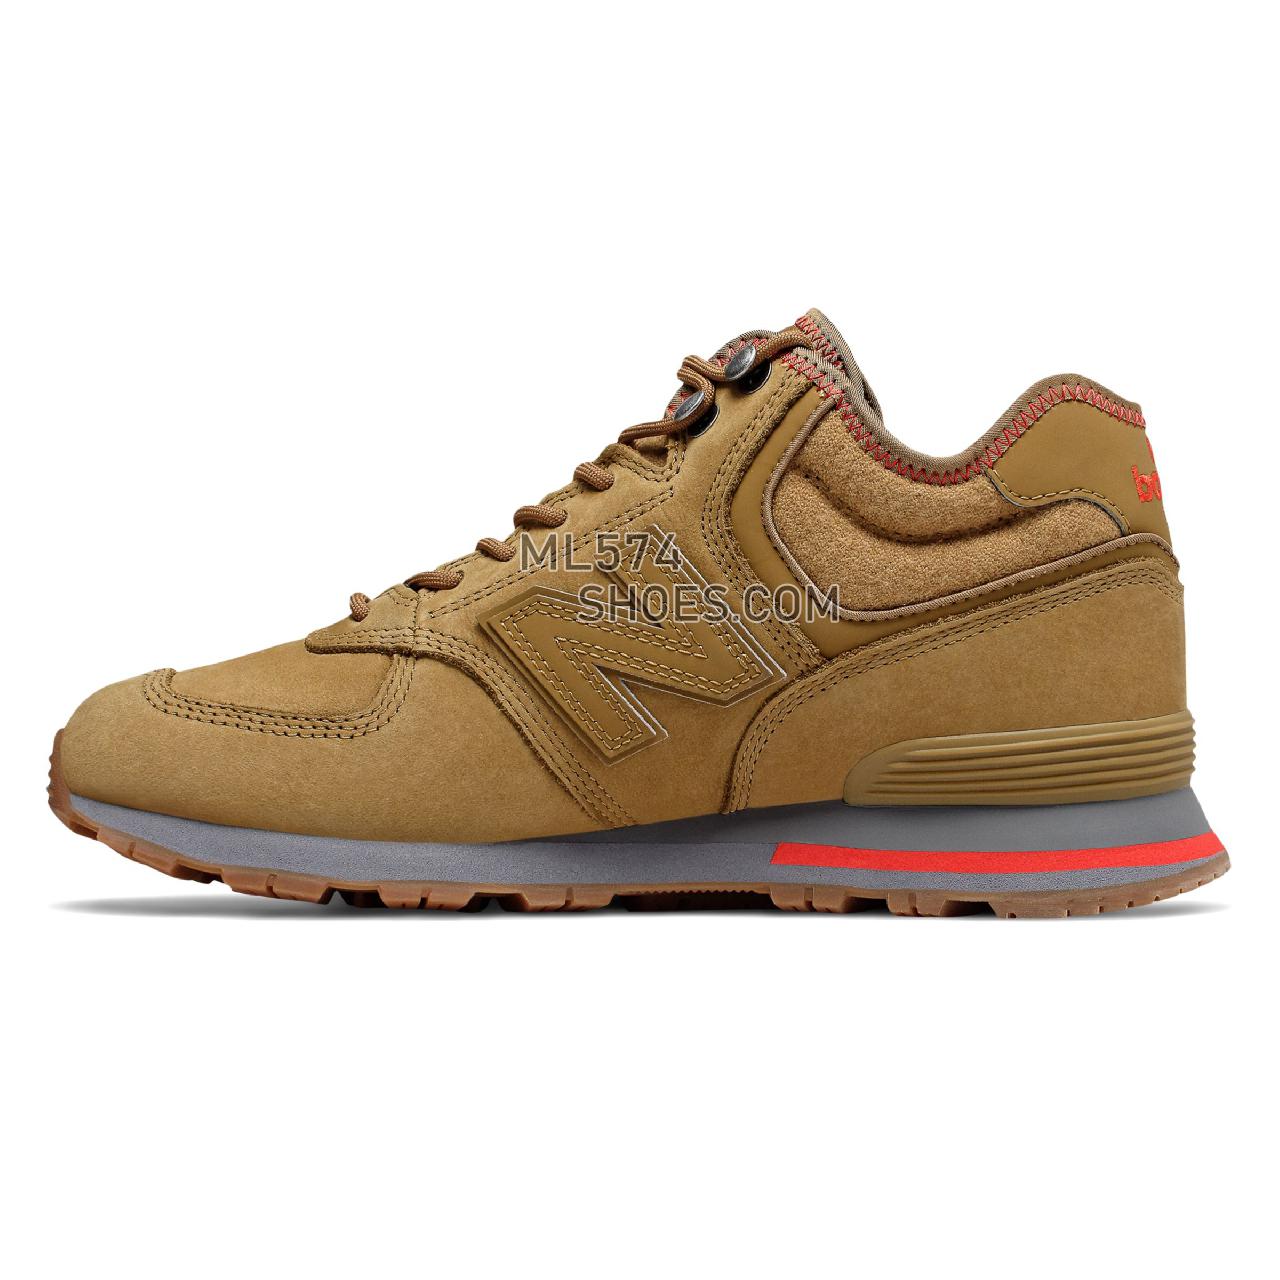 New Balance 574 Mid - Men's 574 Mid Classic MH574V1-27283-M - Tarnish with Velocity Red - MH574REB